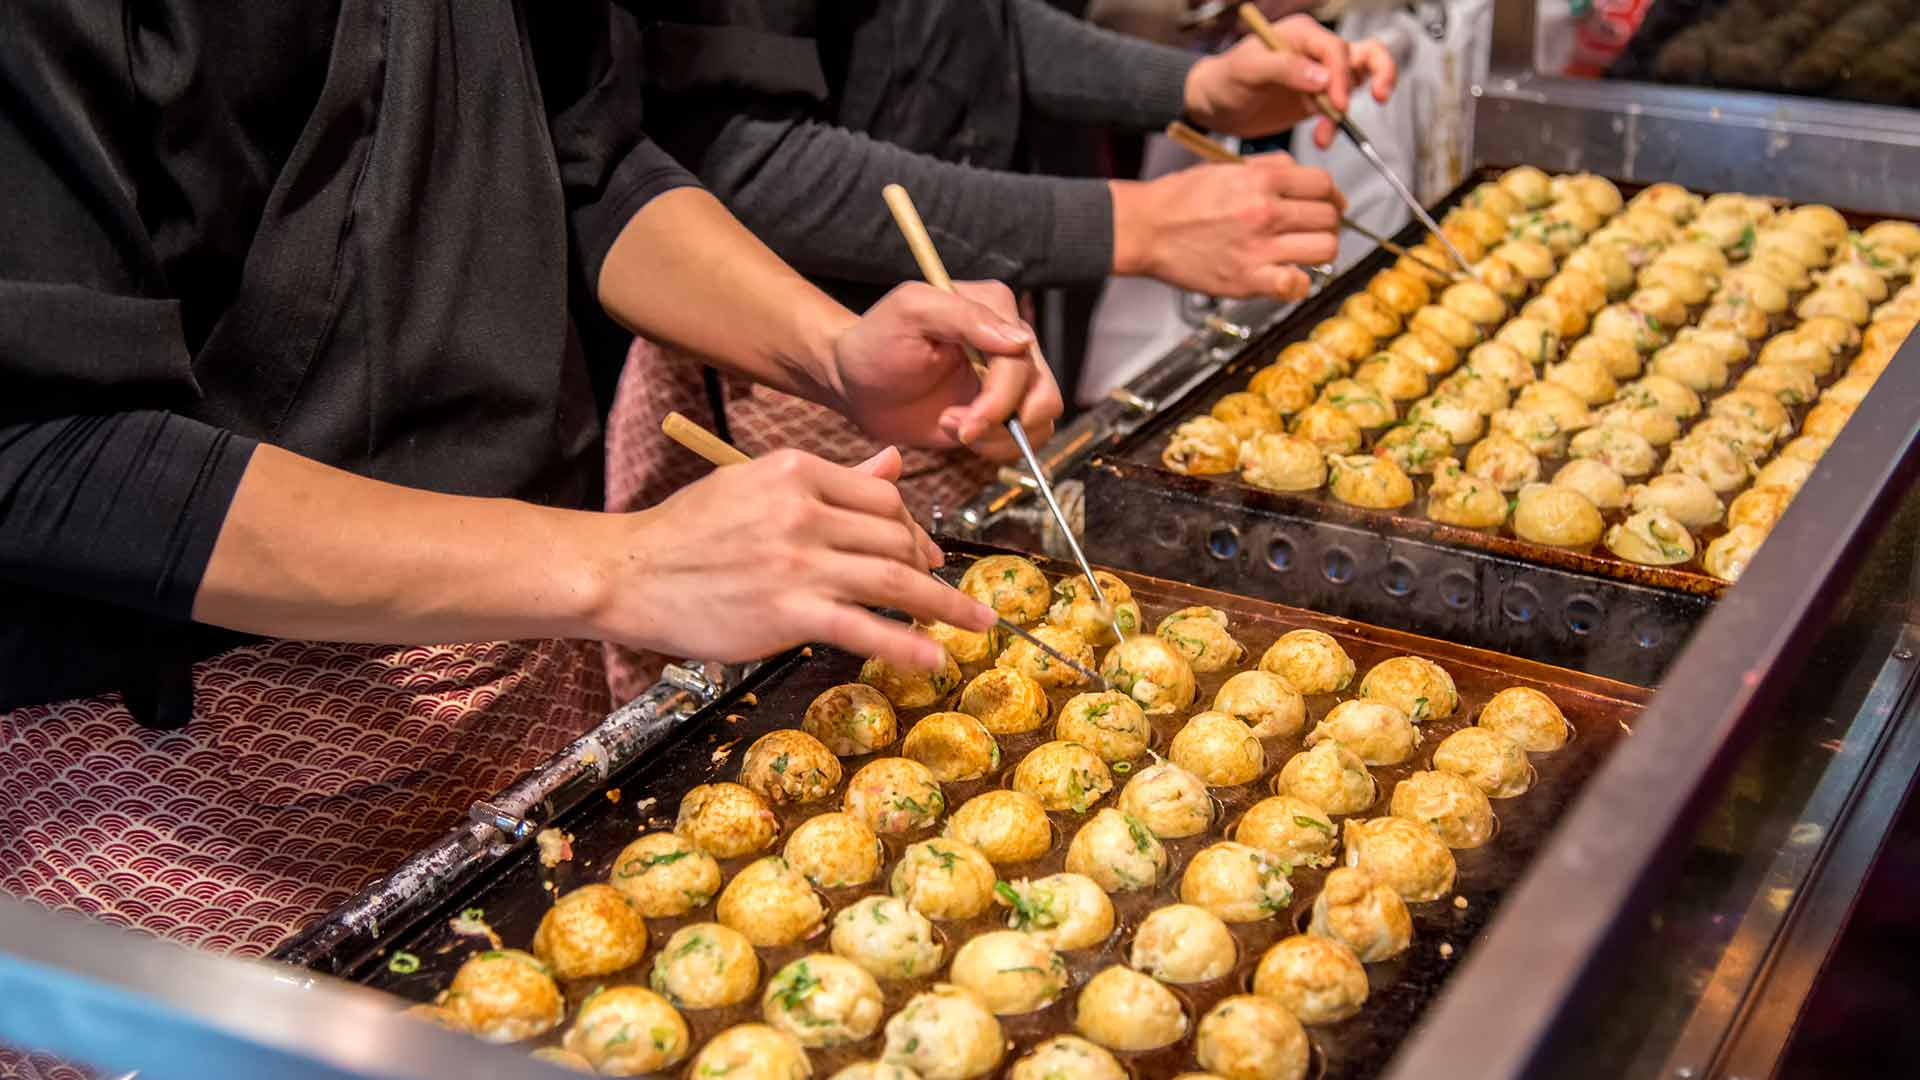 Where Does Takoyaki Come From?